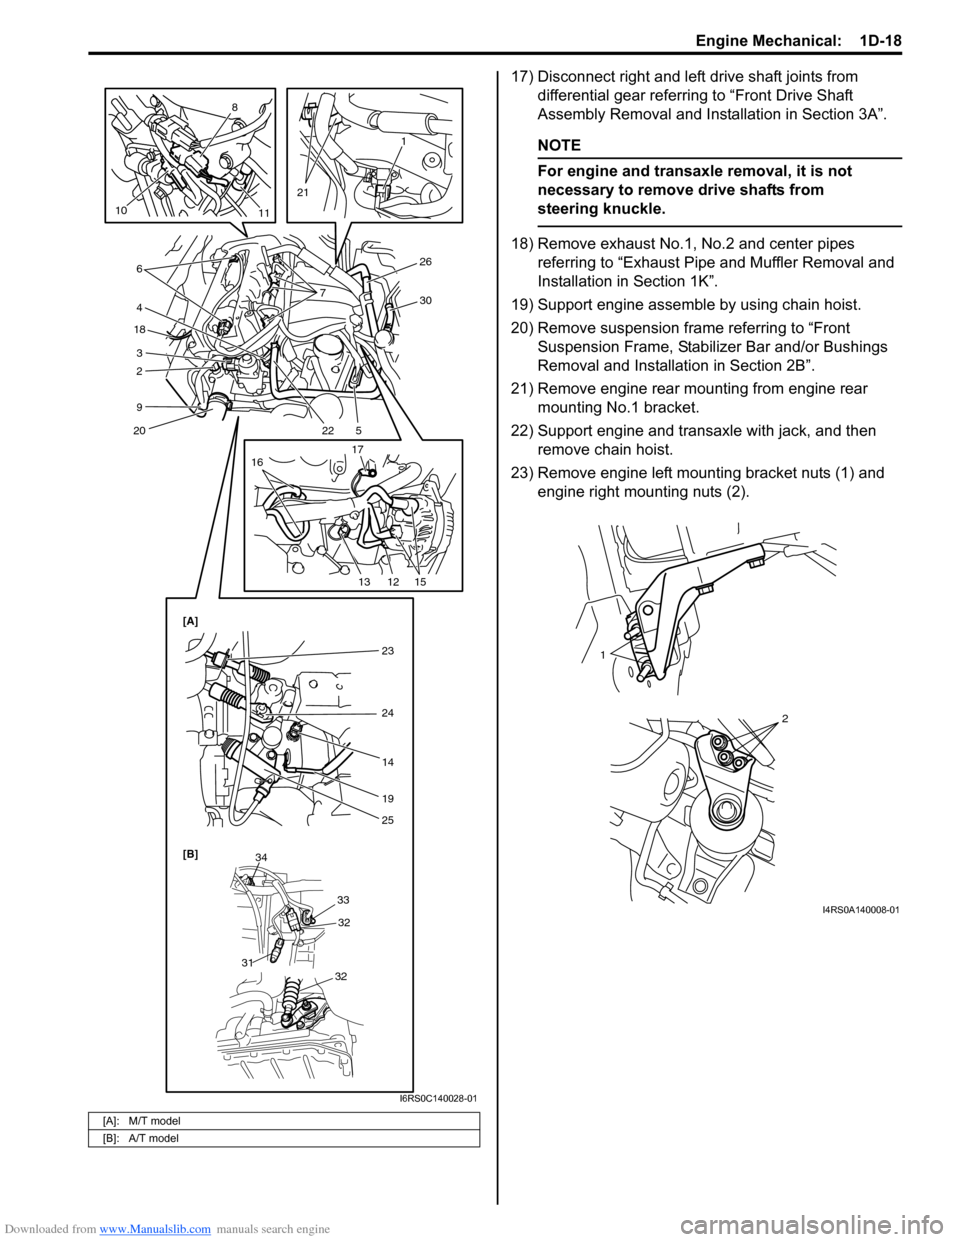 SUZUKI SWIFT 2006 2.G Service Workshop Manual Downloaded from www.Manualslib.com manuals search engine Engine Mechanical:  1D-18
17) Disconnect right and left drive shaft joints from differential gear referring to “Front Drive Shaft 
Assembly R